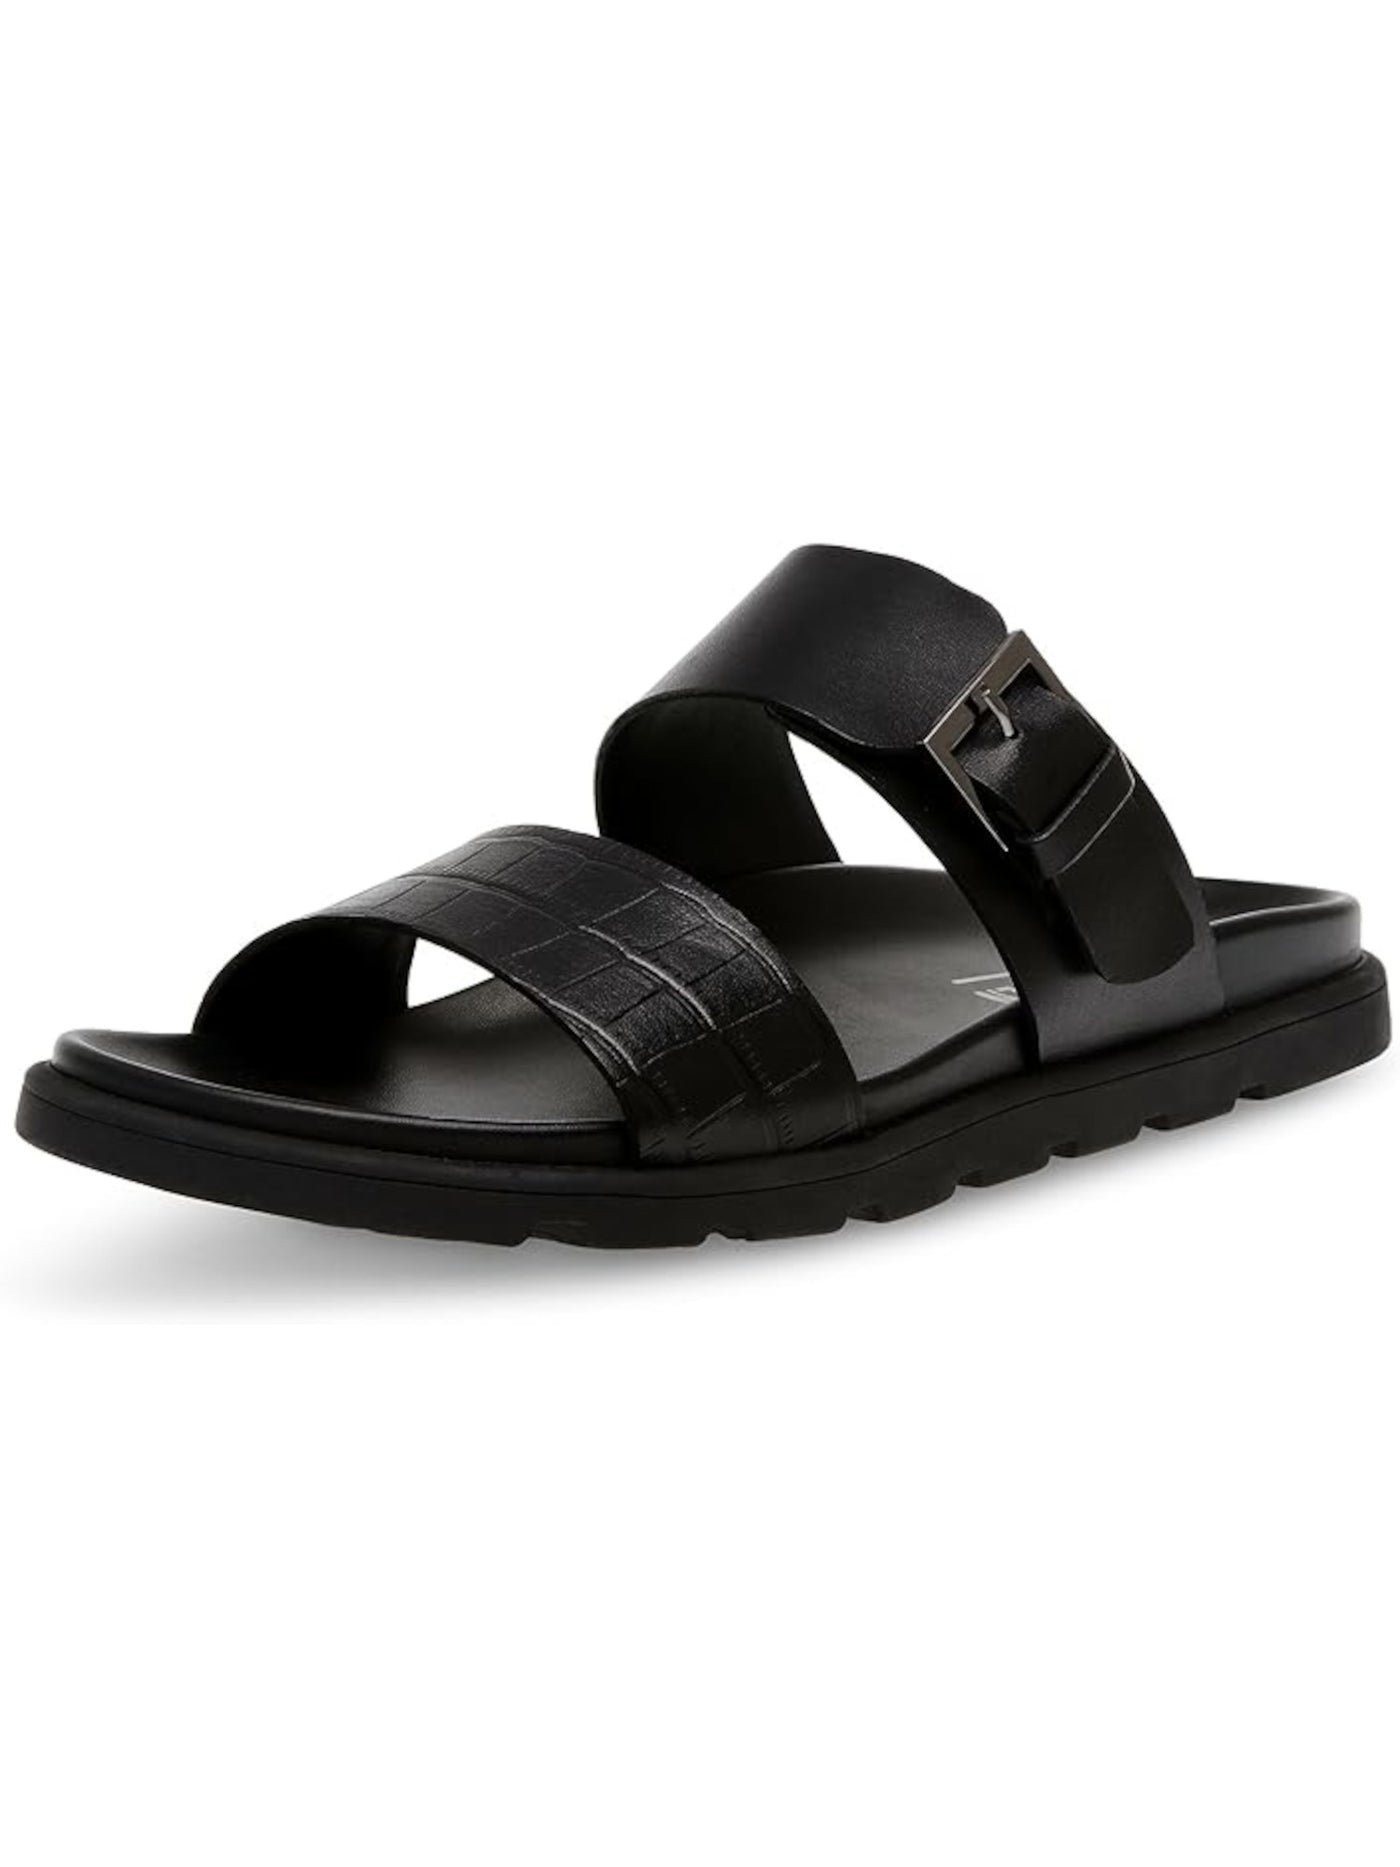 STEVE MADDEN Mens Black Embossed Front Strap Corro Round Toe Buckle Leather Sandals Shoes 9 M